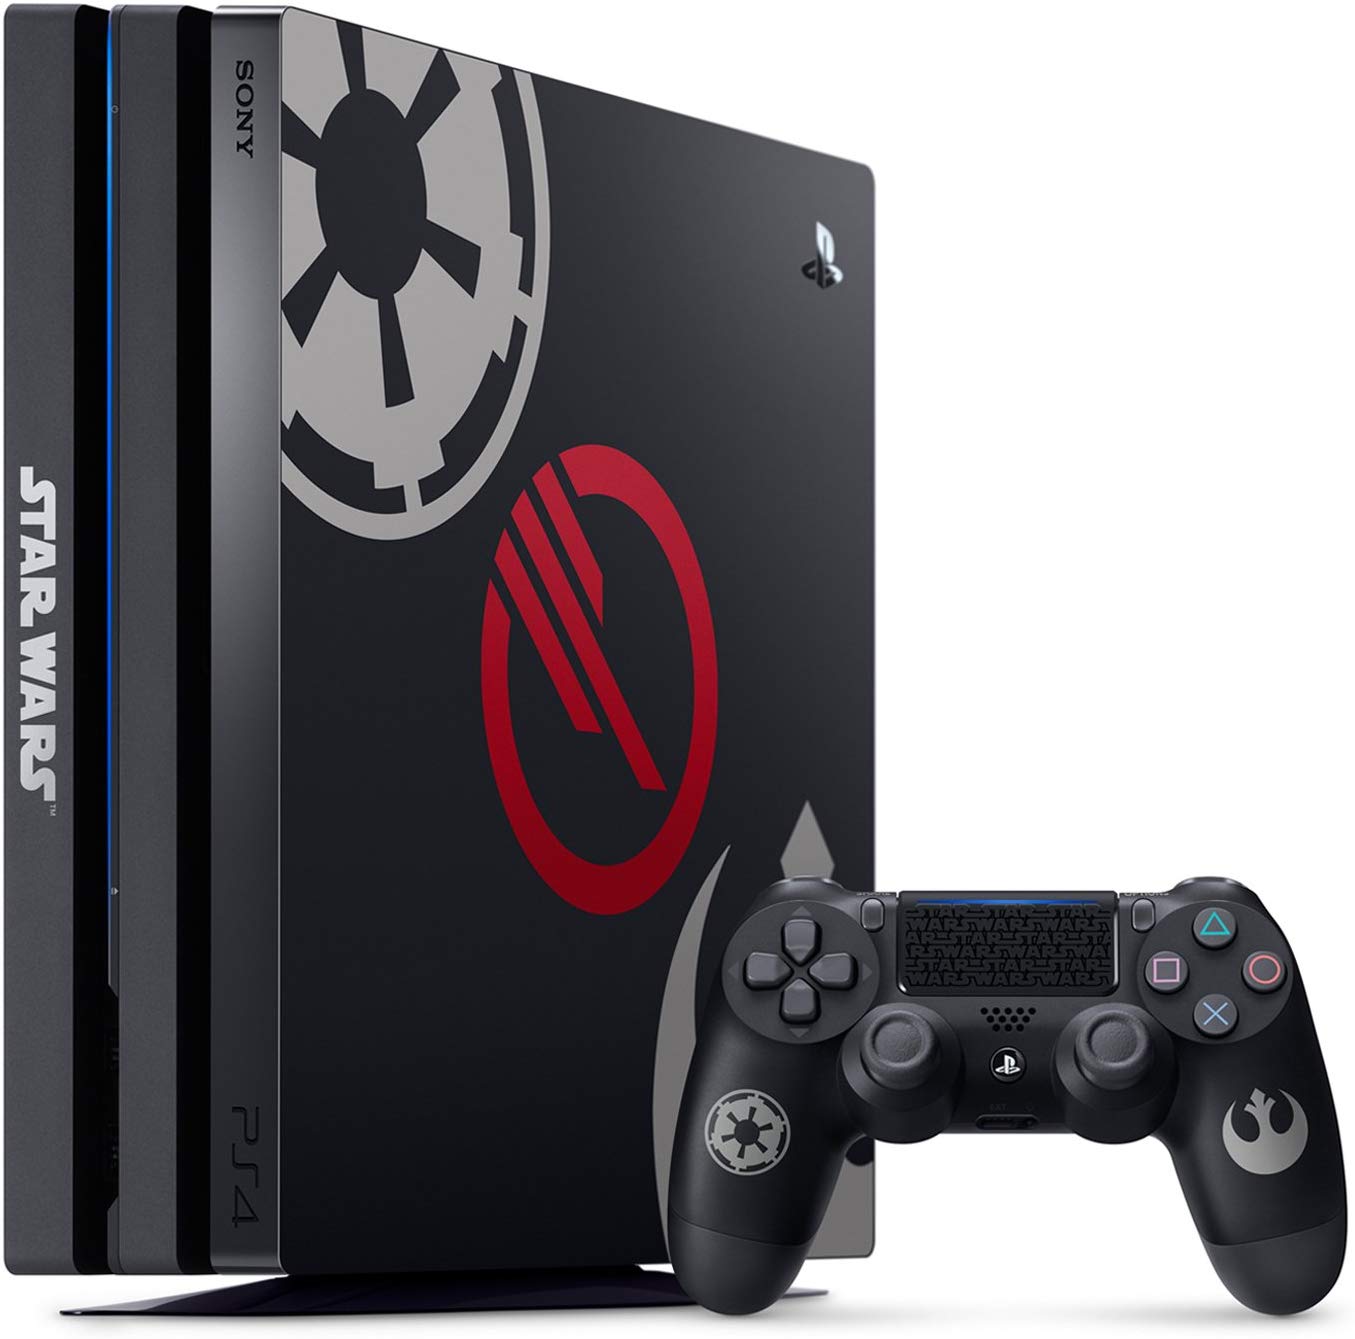 PS4Pro　CUHJ-10019 Star Wars Battlefront II Limited Edition